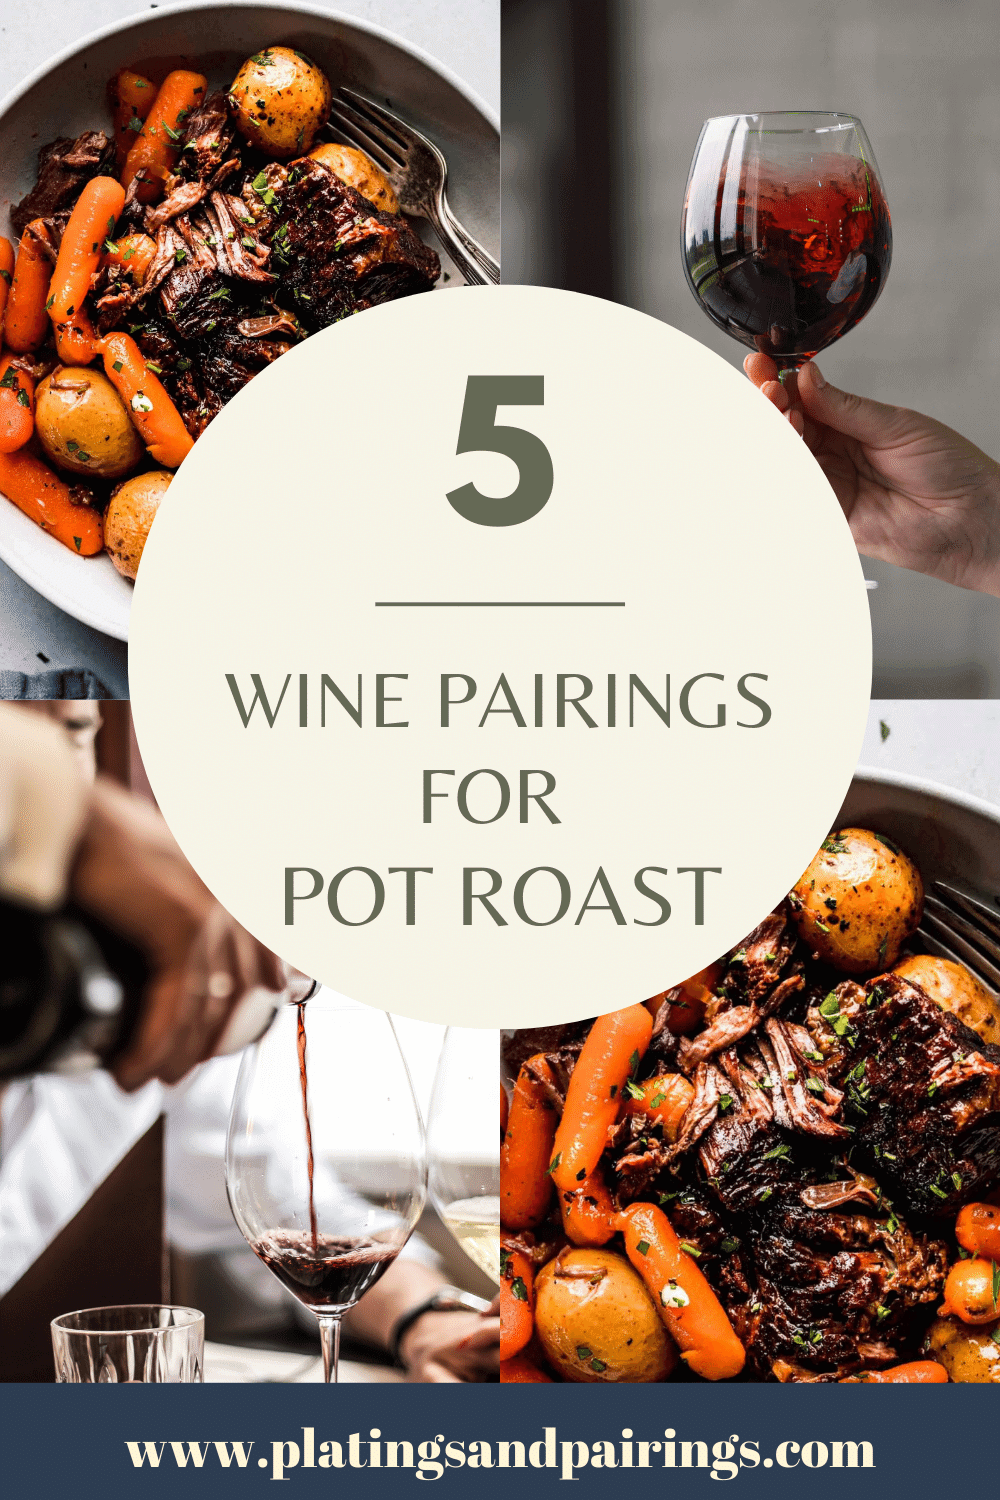 Collage of pot roast dishes with text overlay - wine with pot roast.